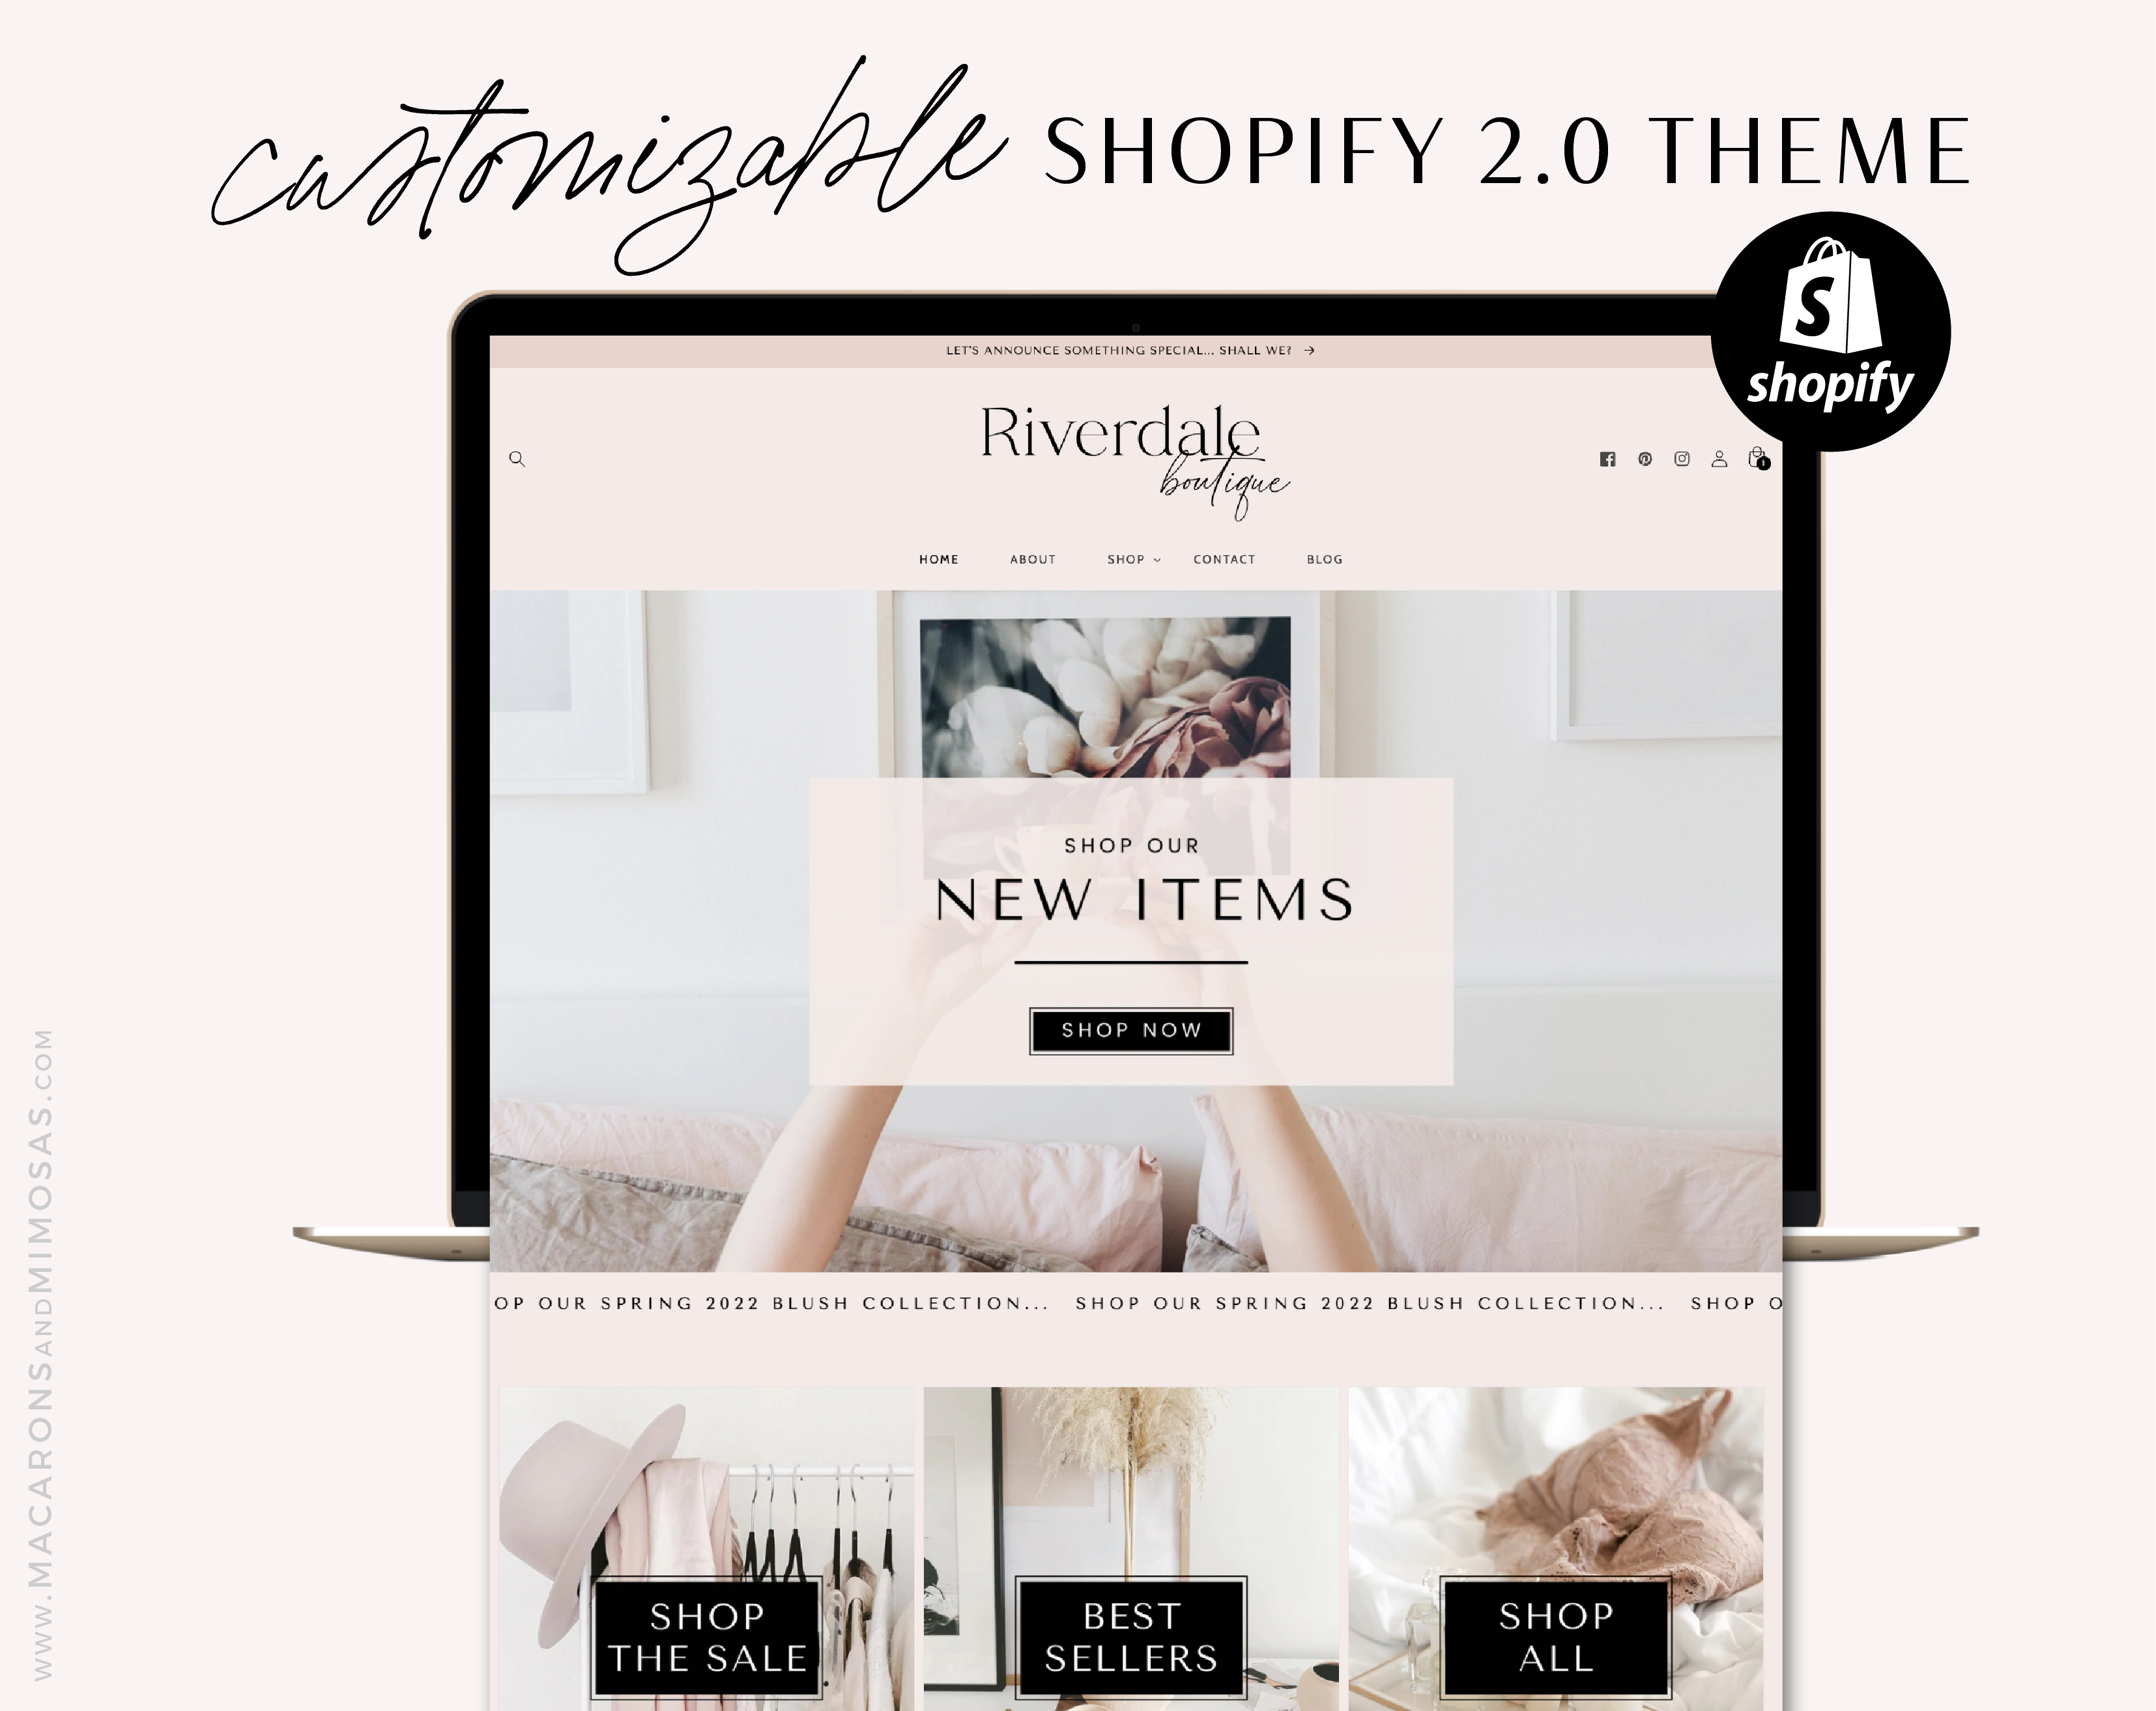 Luxe Shopify Theme Template, Minimal Shopify 2.0 theme in a luxurious black and white design. A creative Shopify website with banners